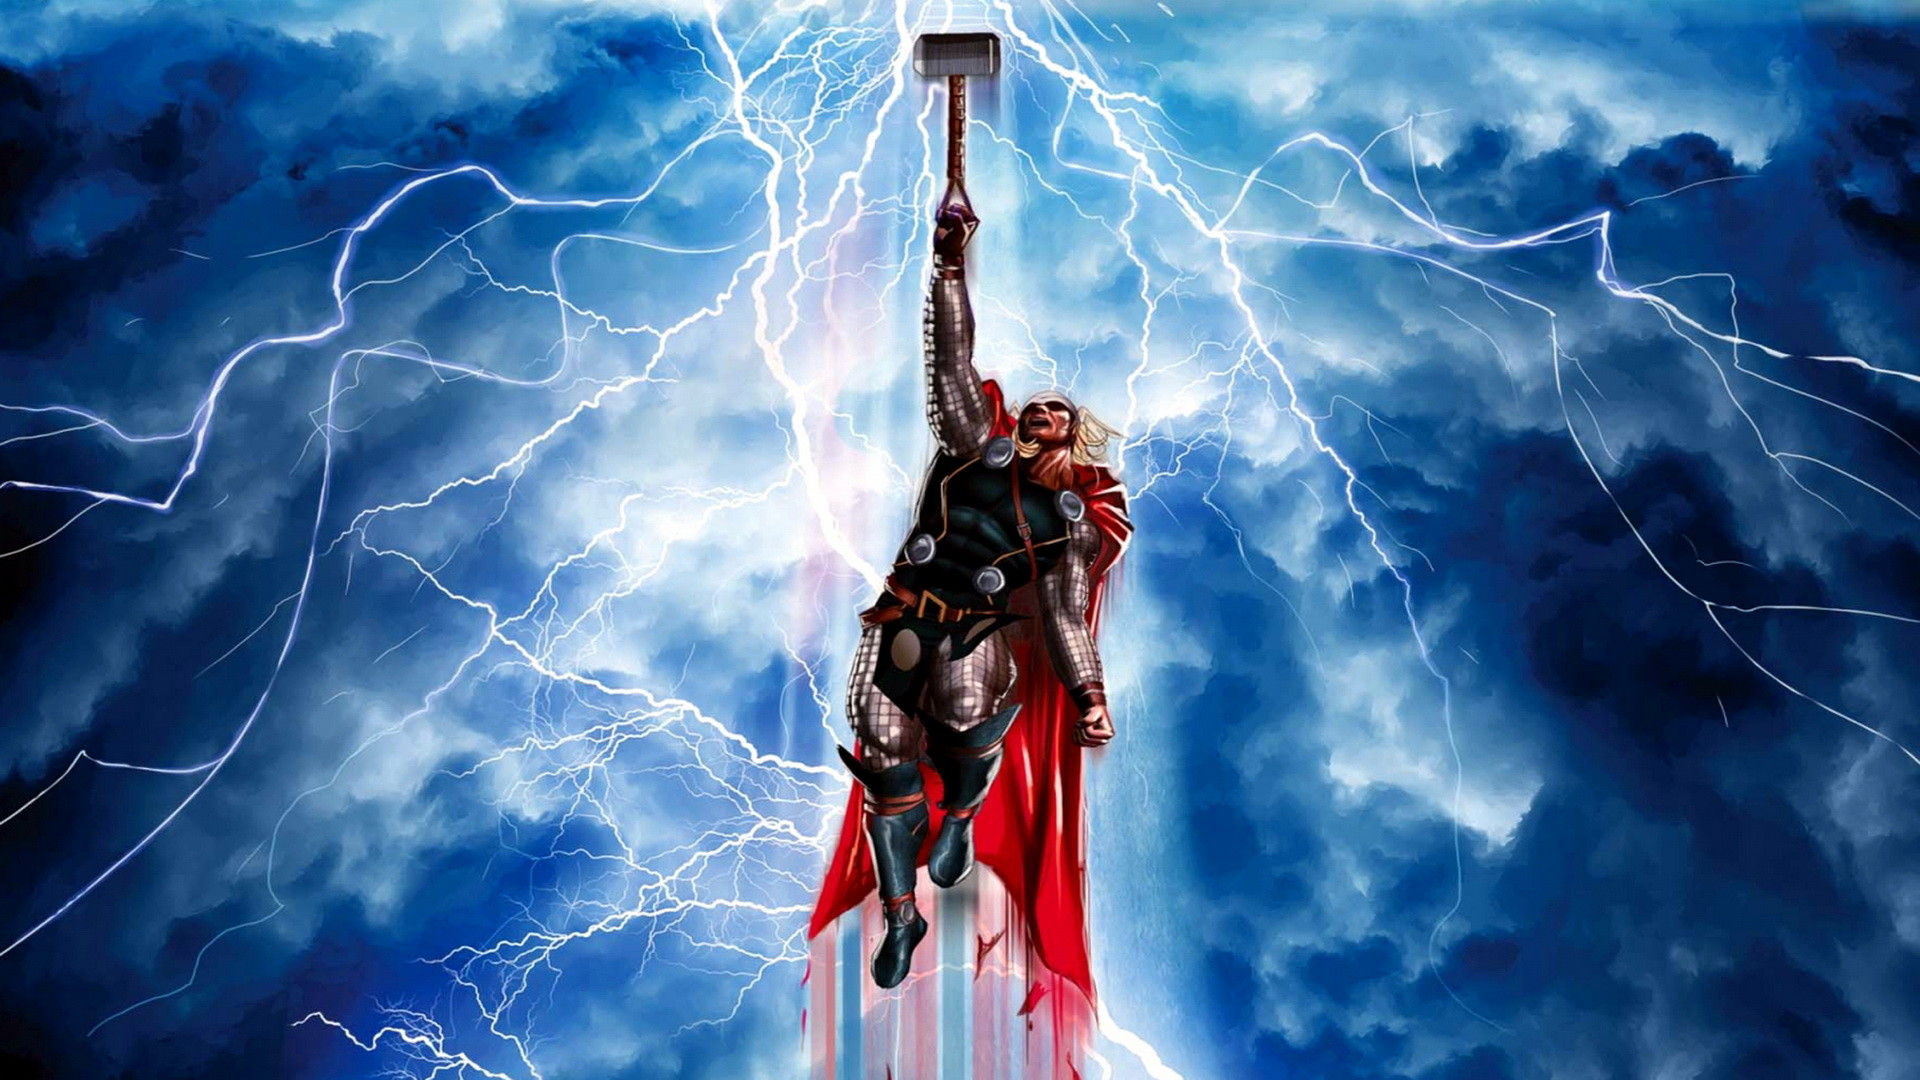 Thor Wallpapers, Hd, Backgrounds, Thor Wallpaper 11 - 3d Wallpaper Of Thor - HD Wallpaper 